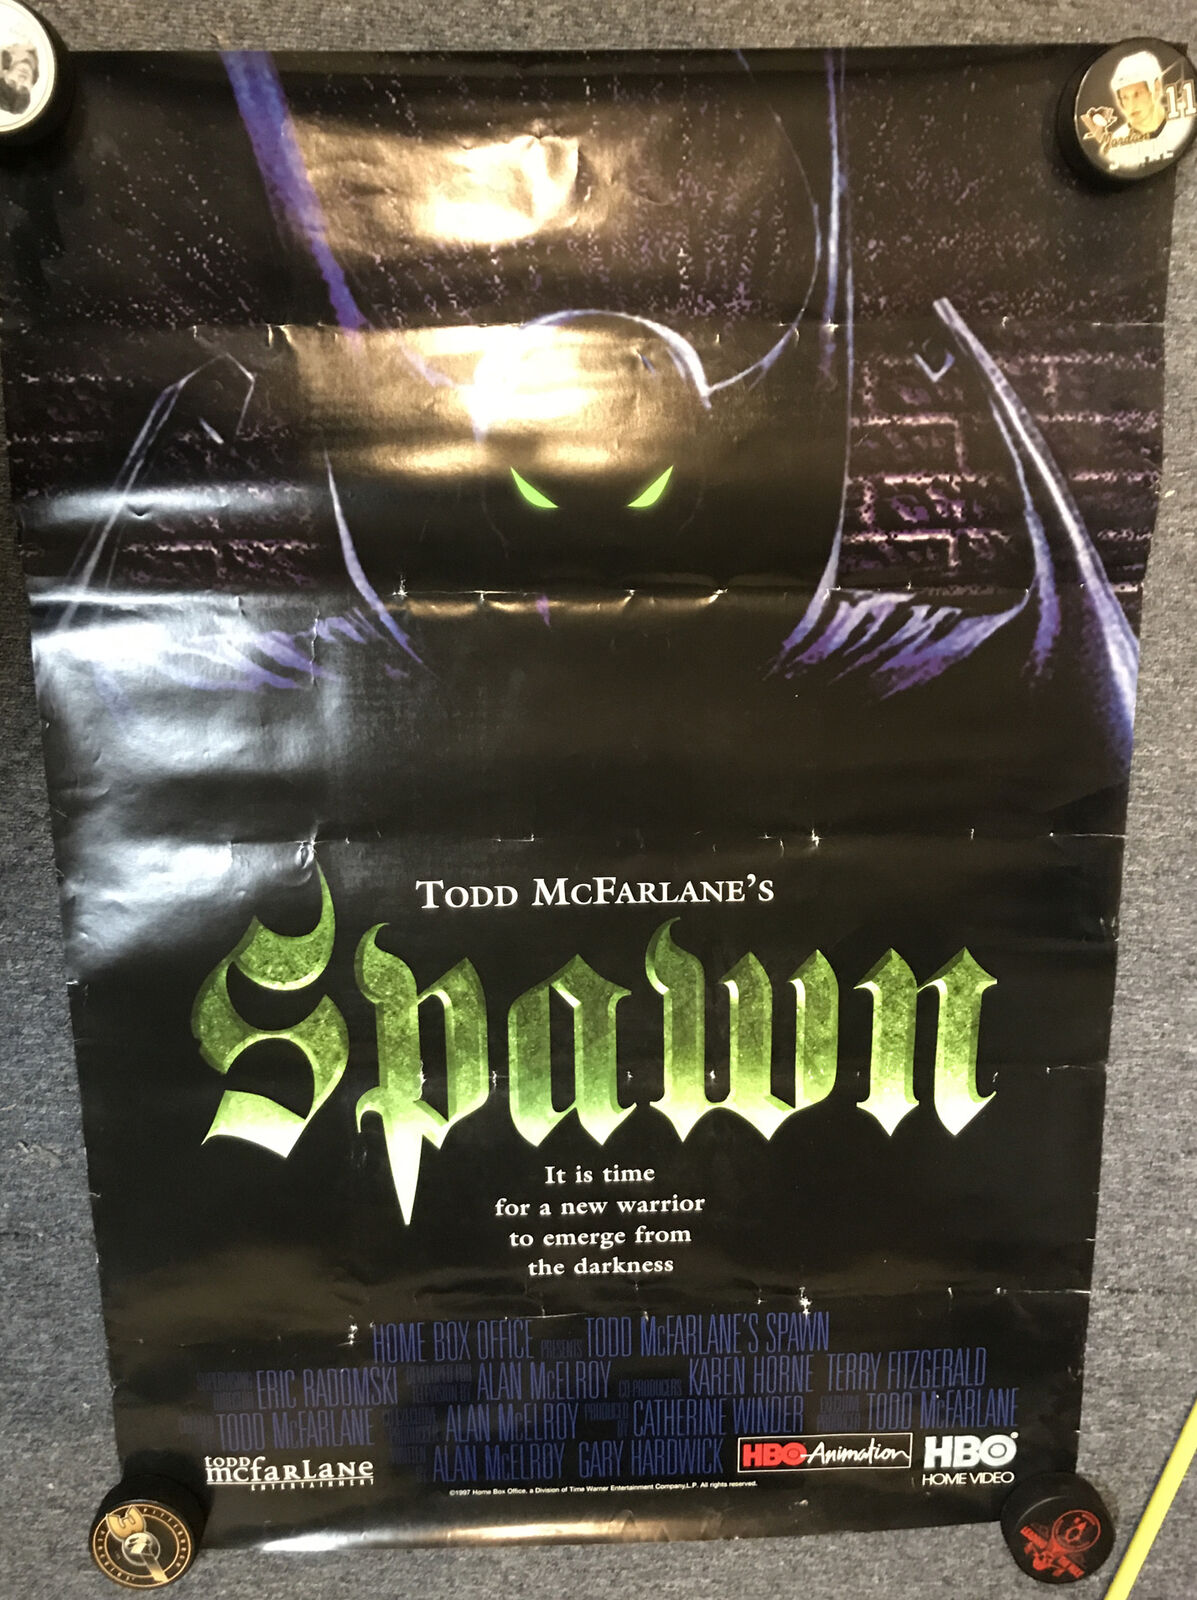 Spawn hbo Todd Mcfarlane Large Poster 27x38 1/2 1997 HBO Animation